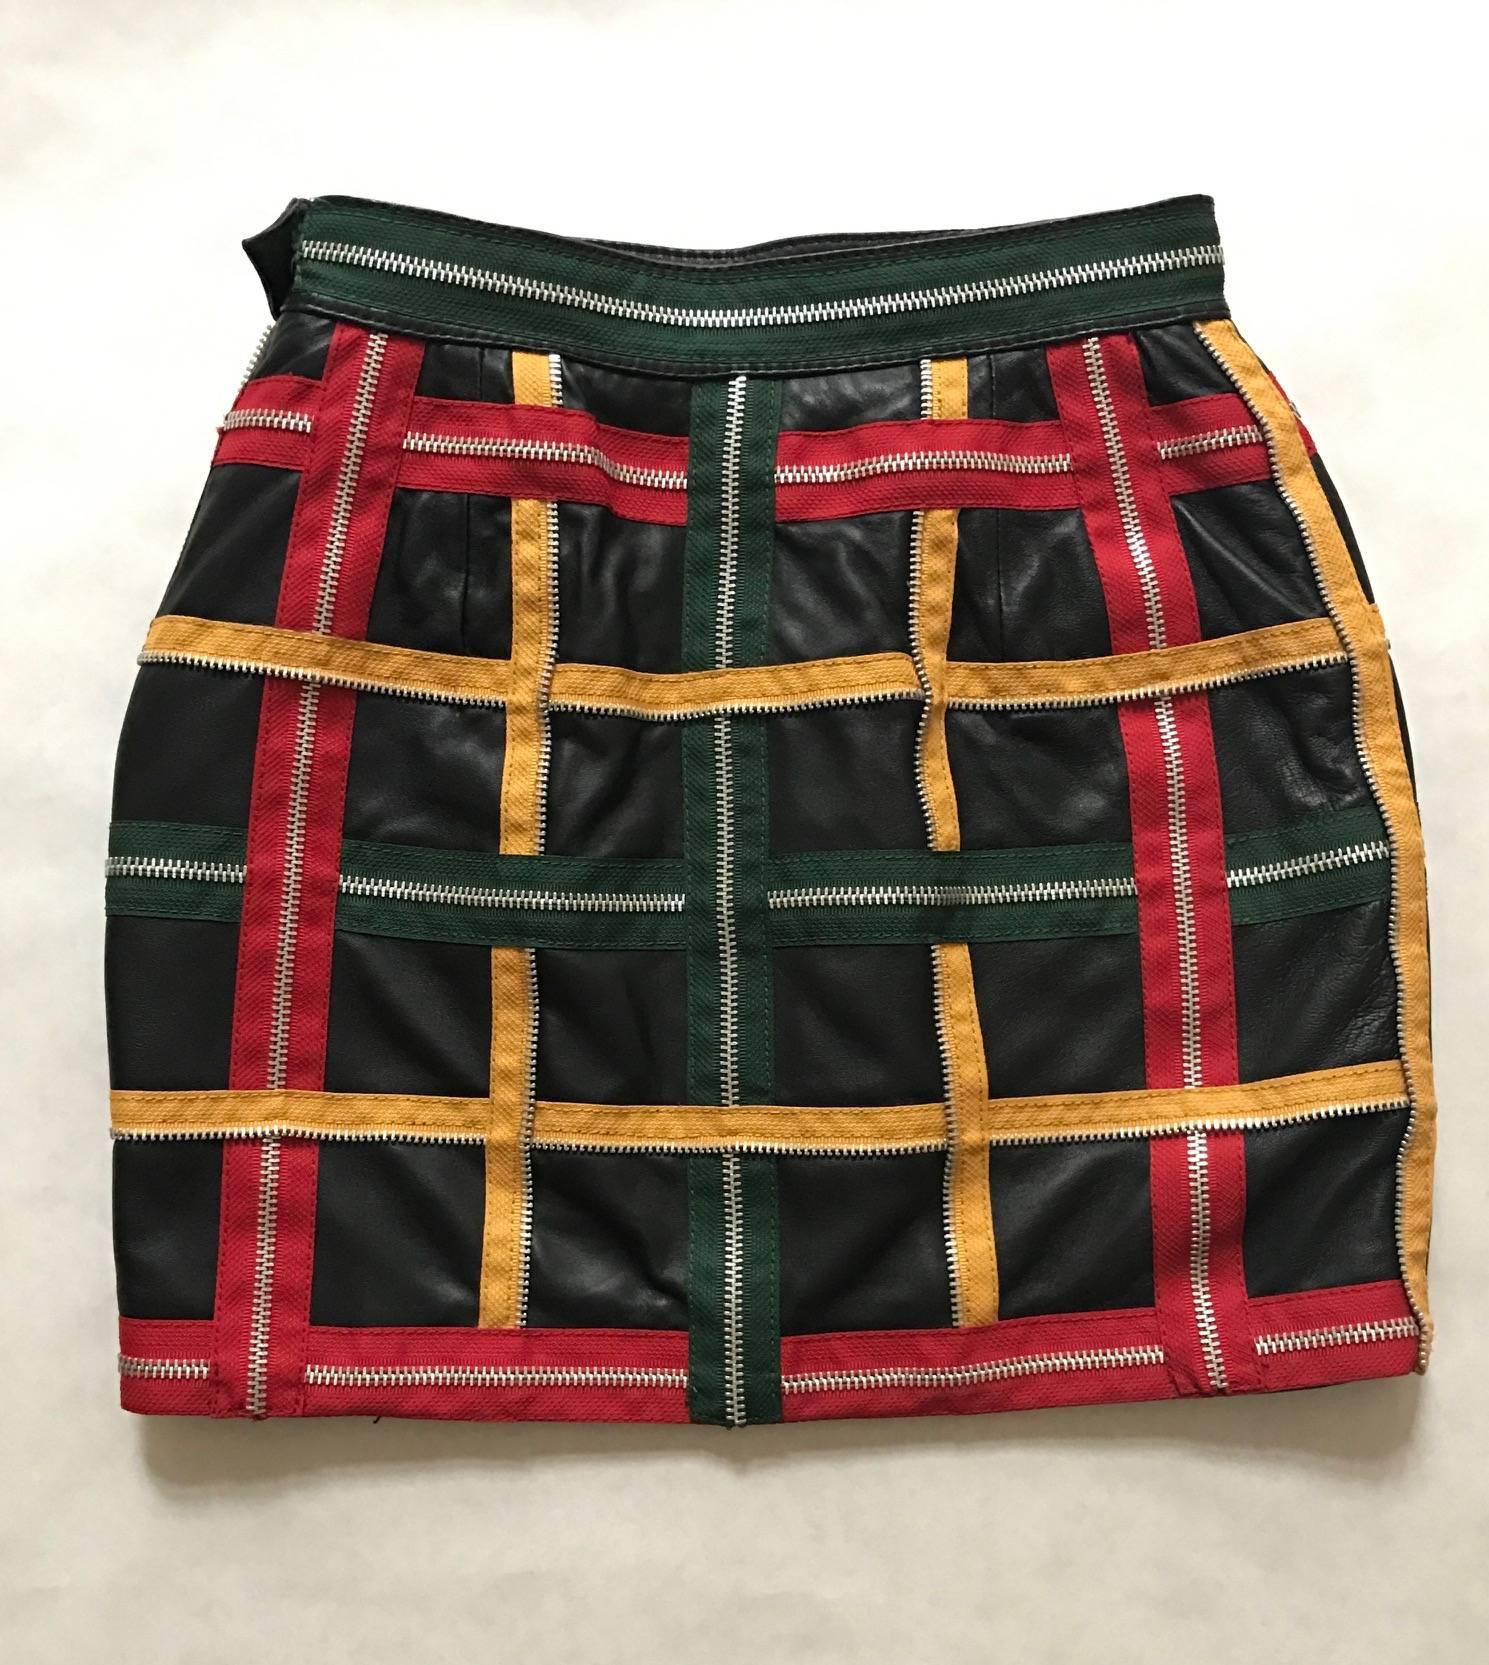 Vintage 1980's Moschino black leather mini skirt featuring yellow, green and red zippers woven into a check pattern. Iconic Franco Moschino: Biker chic meets tongue-in-cheek!  Side zip and snap.

100% leather.
Fully lined in 100% rayon.

Made